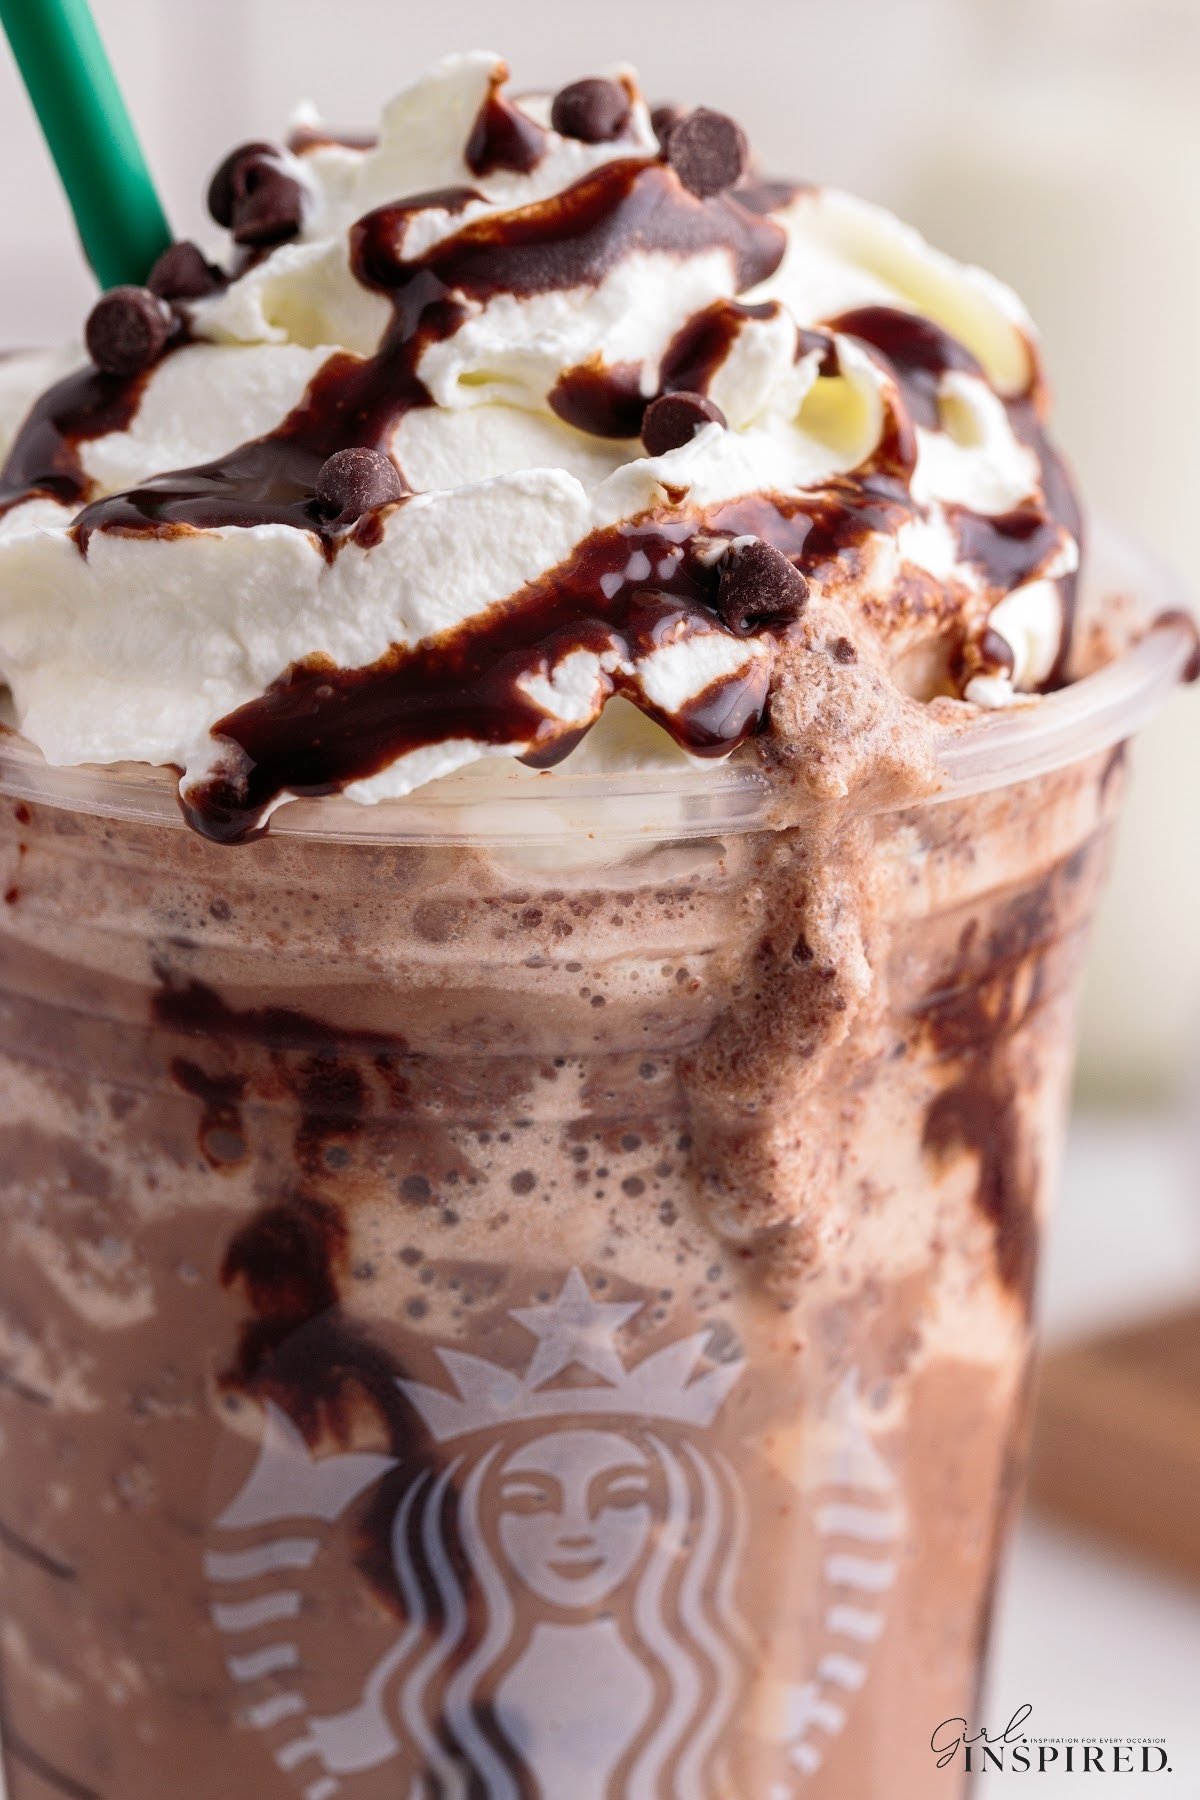 Close up of chocolate drizzle, chocolate chips, and whipped cream dripping off of Starbucks cup full of double chocolate chip frappuccino.